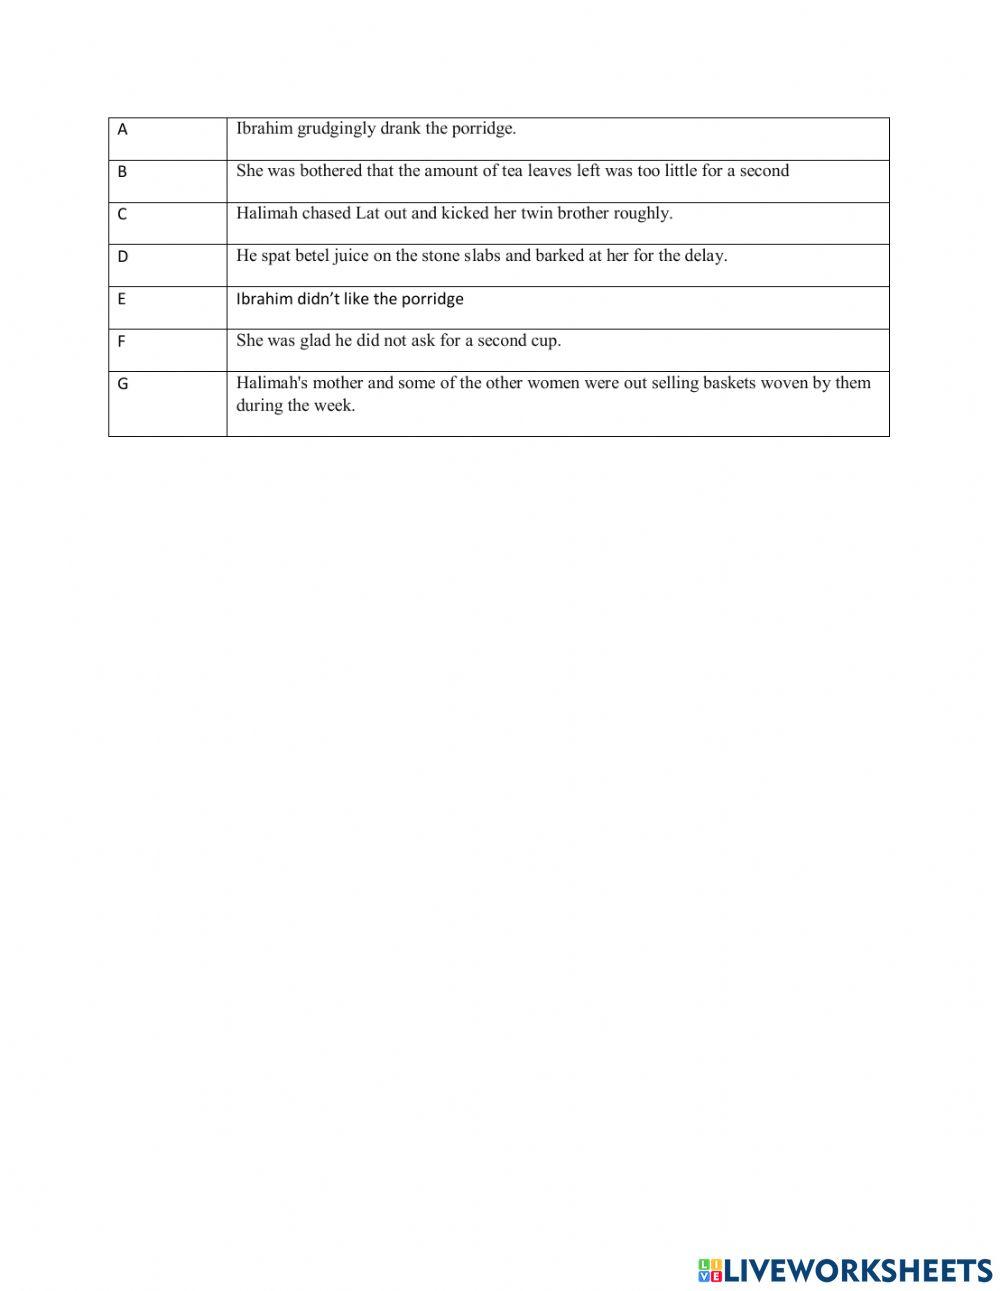 Spm cefr drilling worksheet part 4 and part 5 reading paper